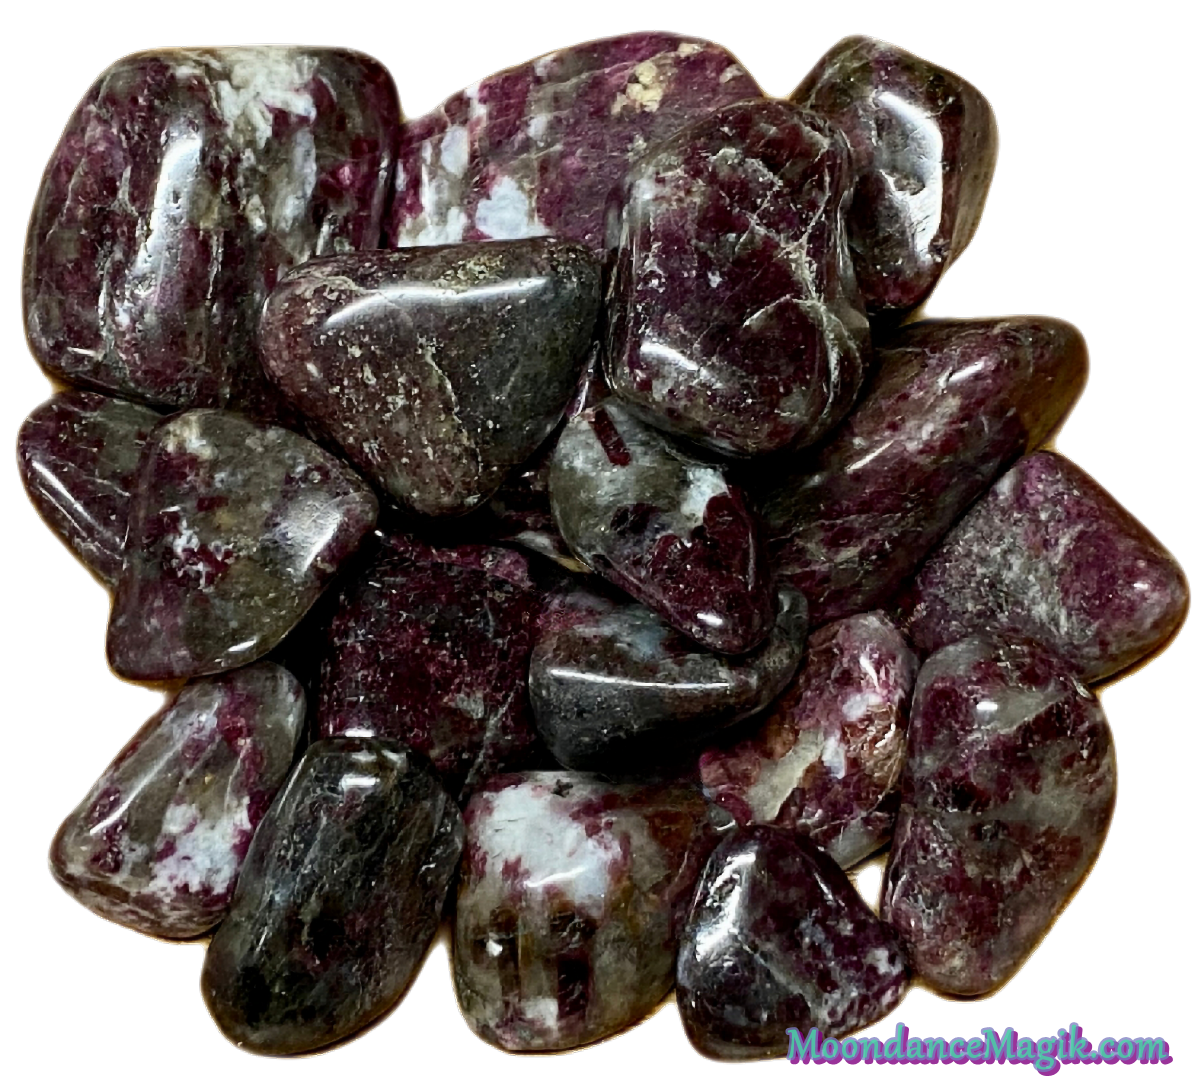 Luscious Pink Tourmaline Tumbles - Attract Love!